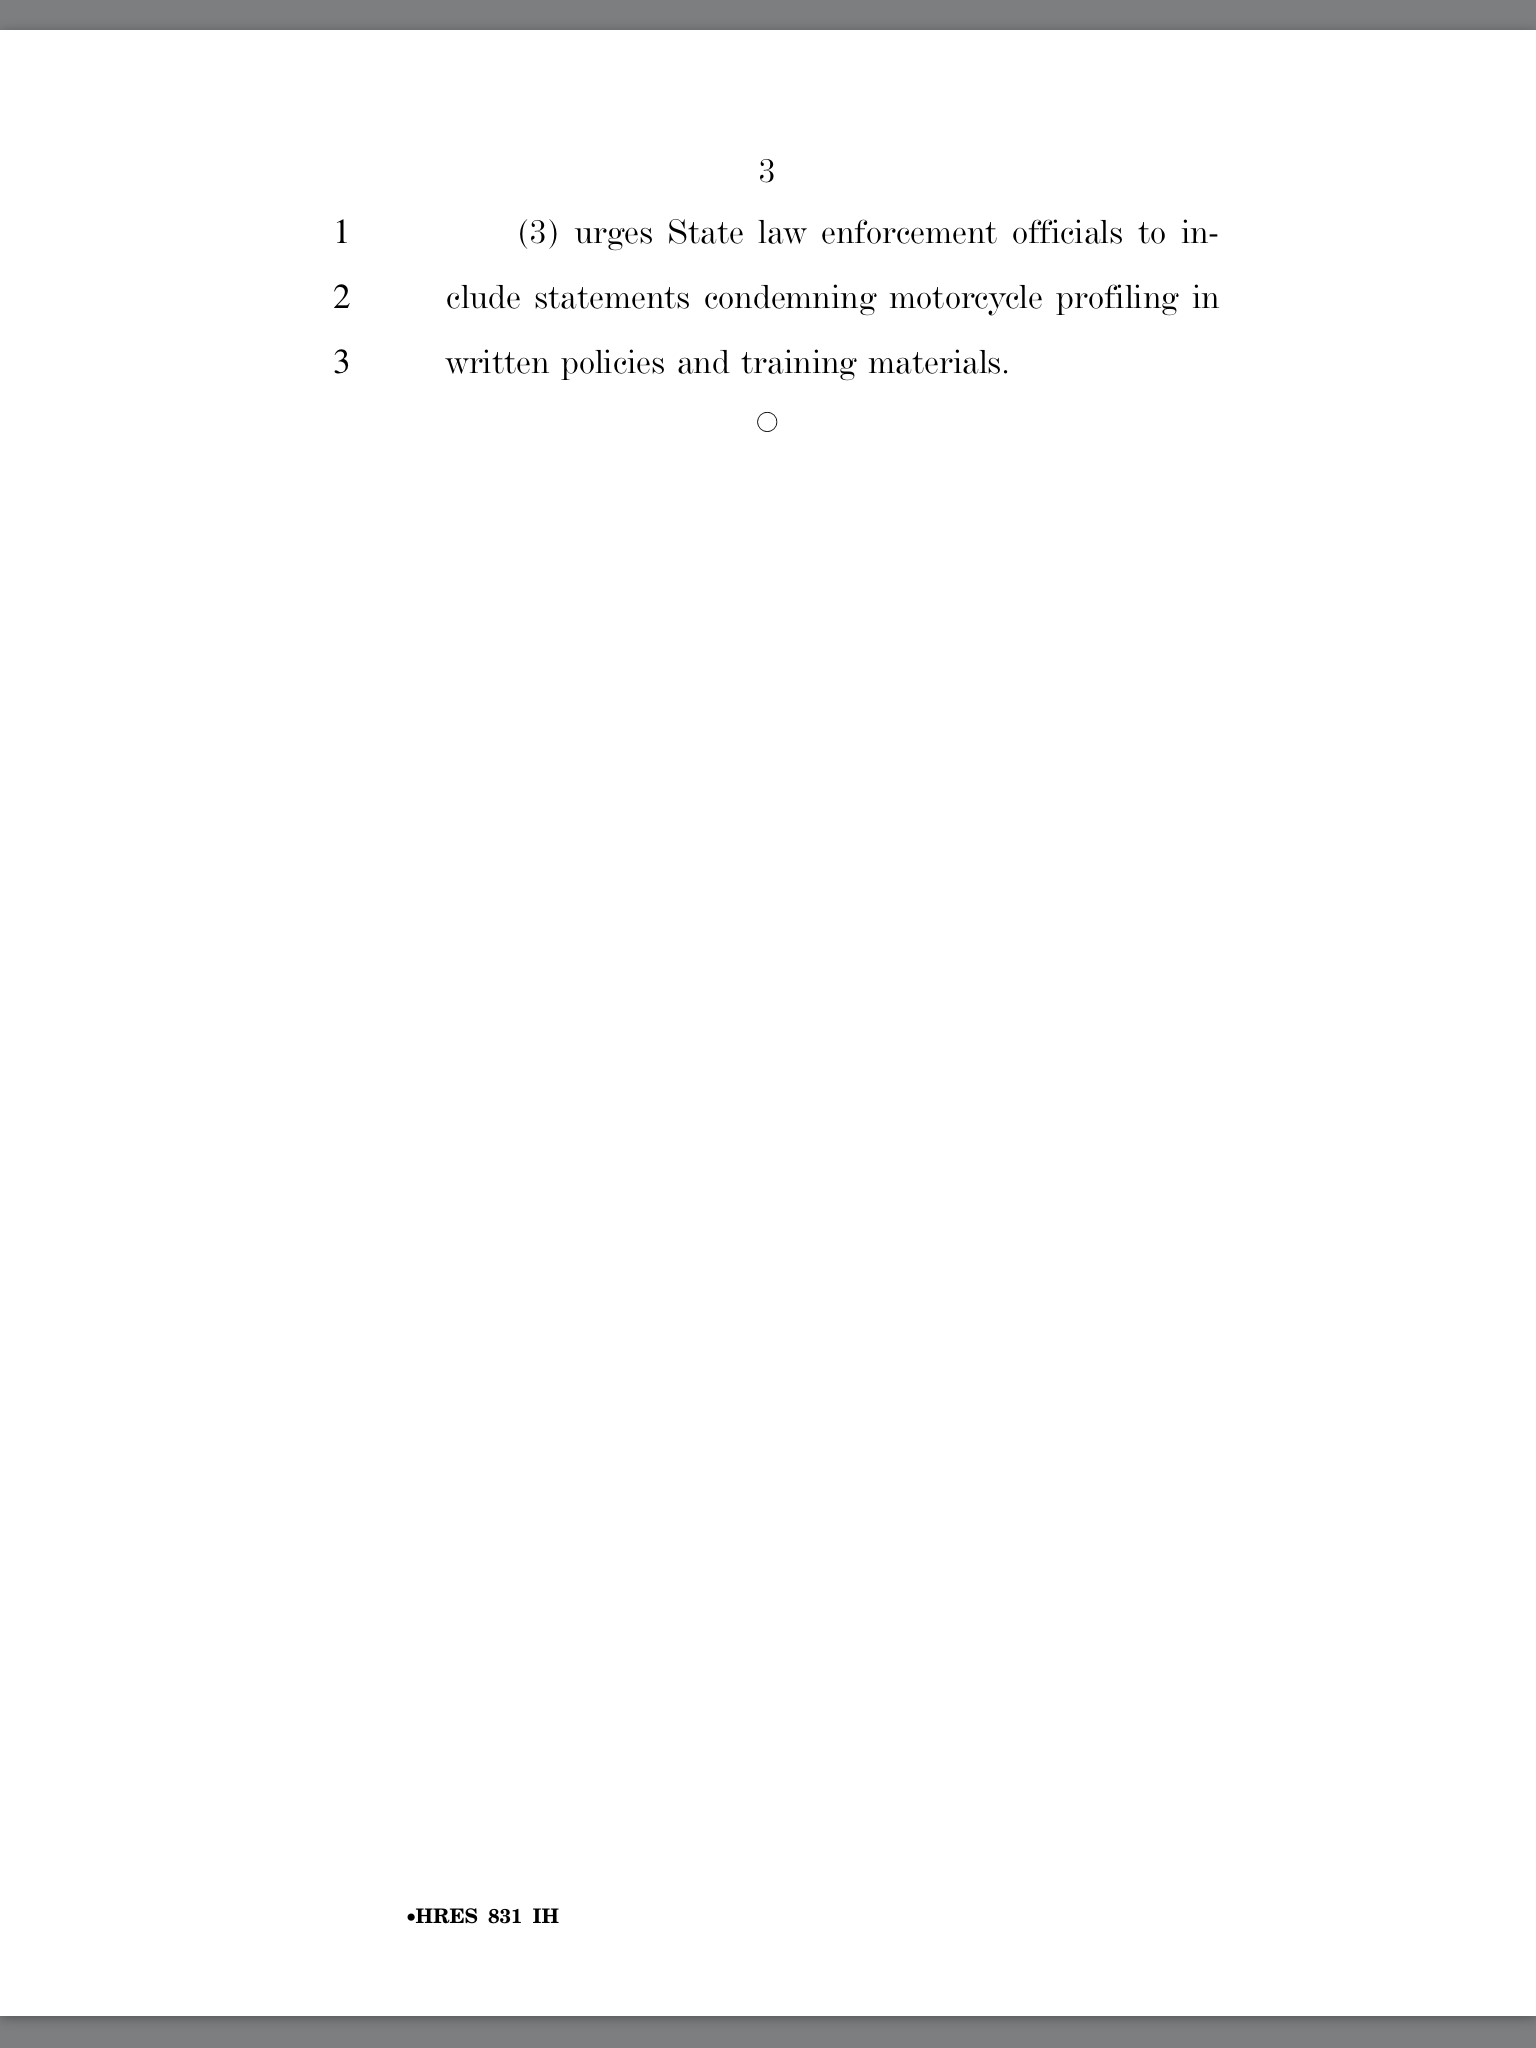 US-House-Resolution-831-page3